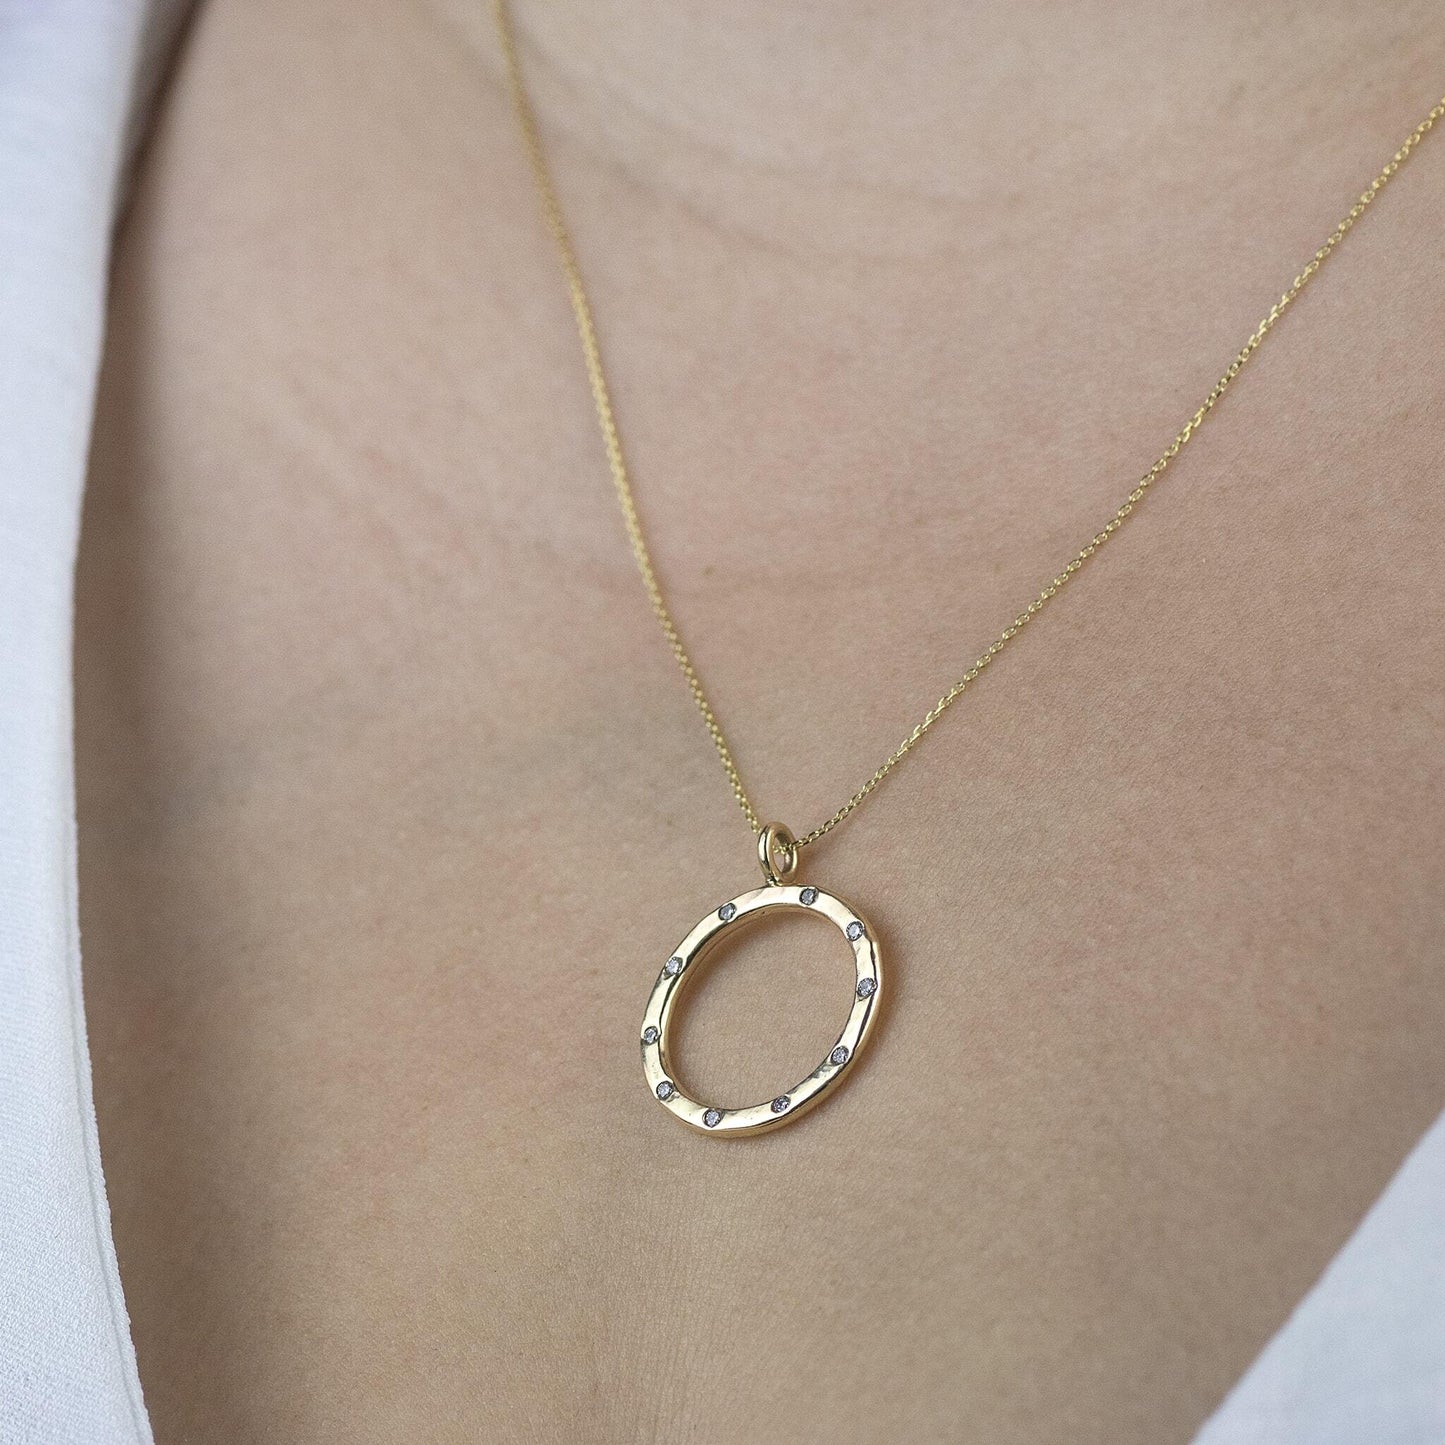 80th Birthday Gift - Recycled 9kt Gold Diamond Halo Necklace - 8 Diamonds for 8 Decades